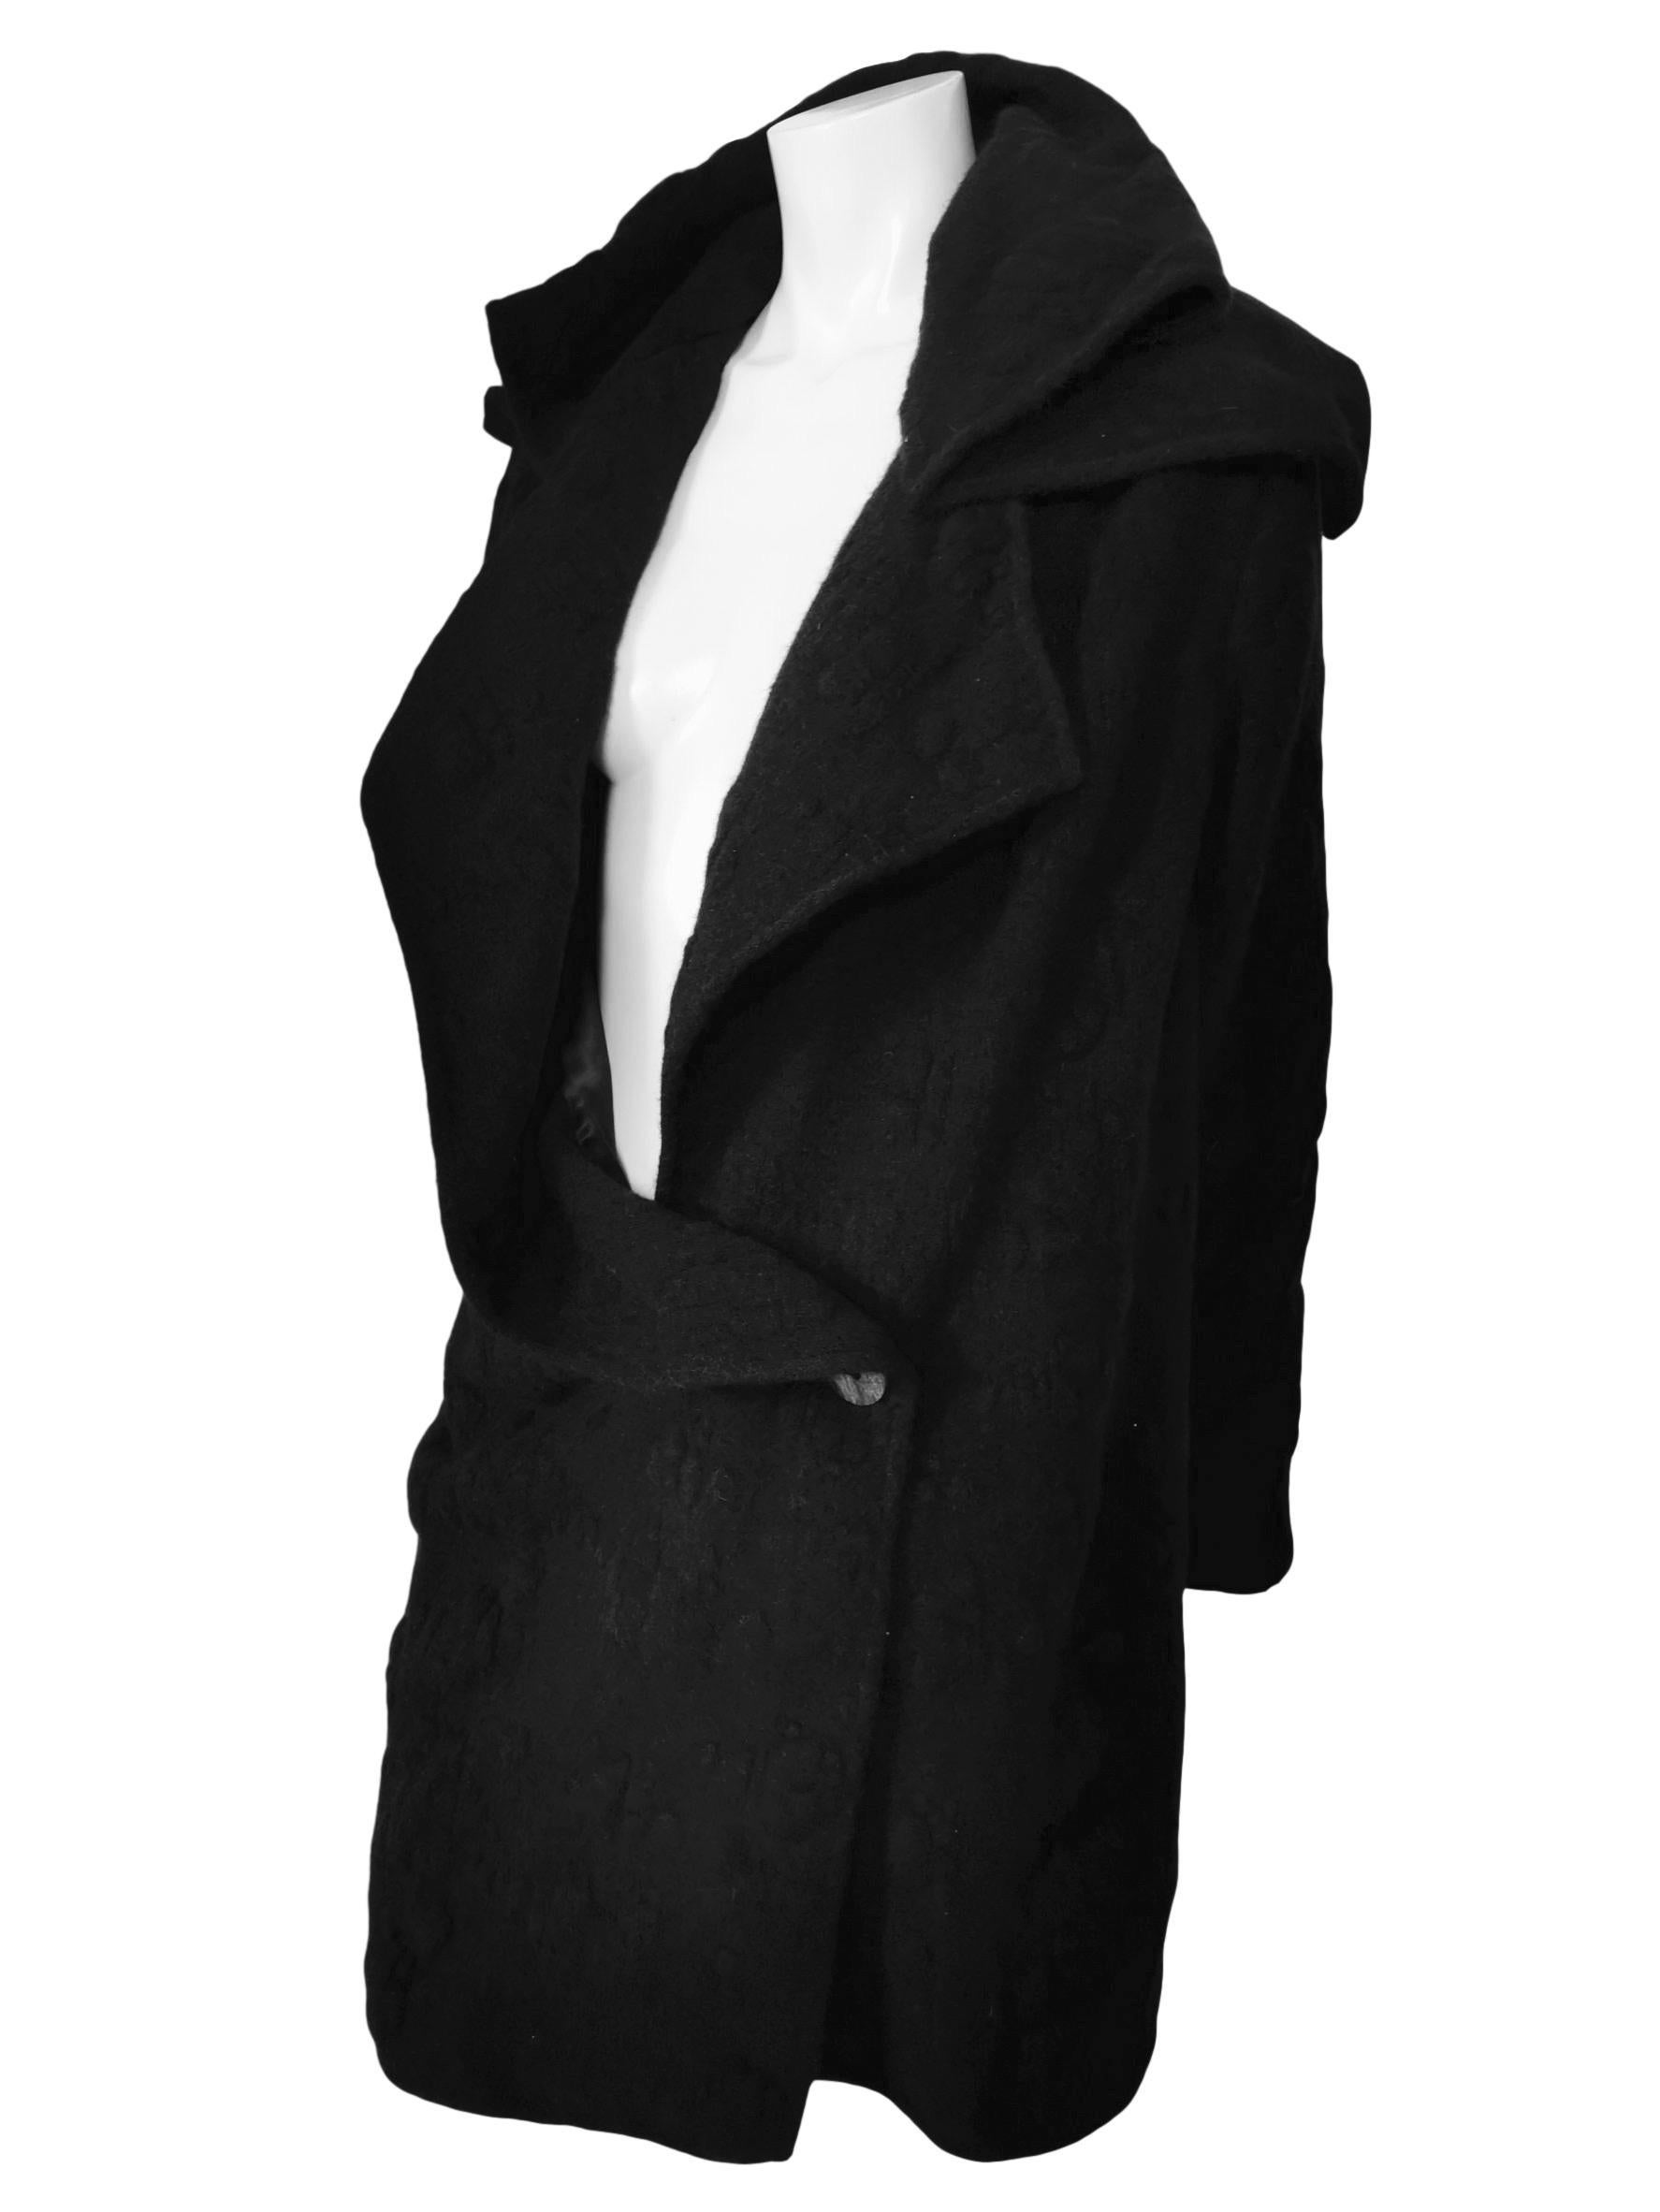 Women's John Galliano Fall/Winter 2000 Oversize Slouchy Textured Wool and Mohair Coat For Sale